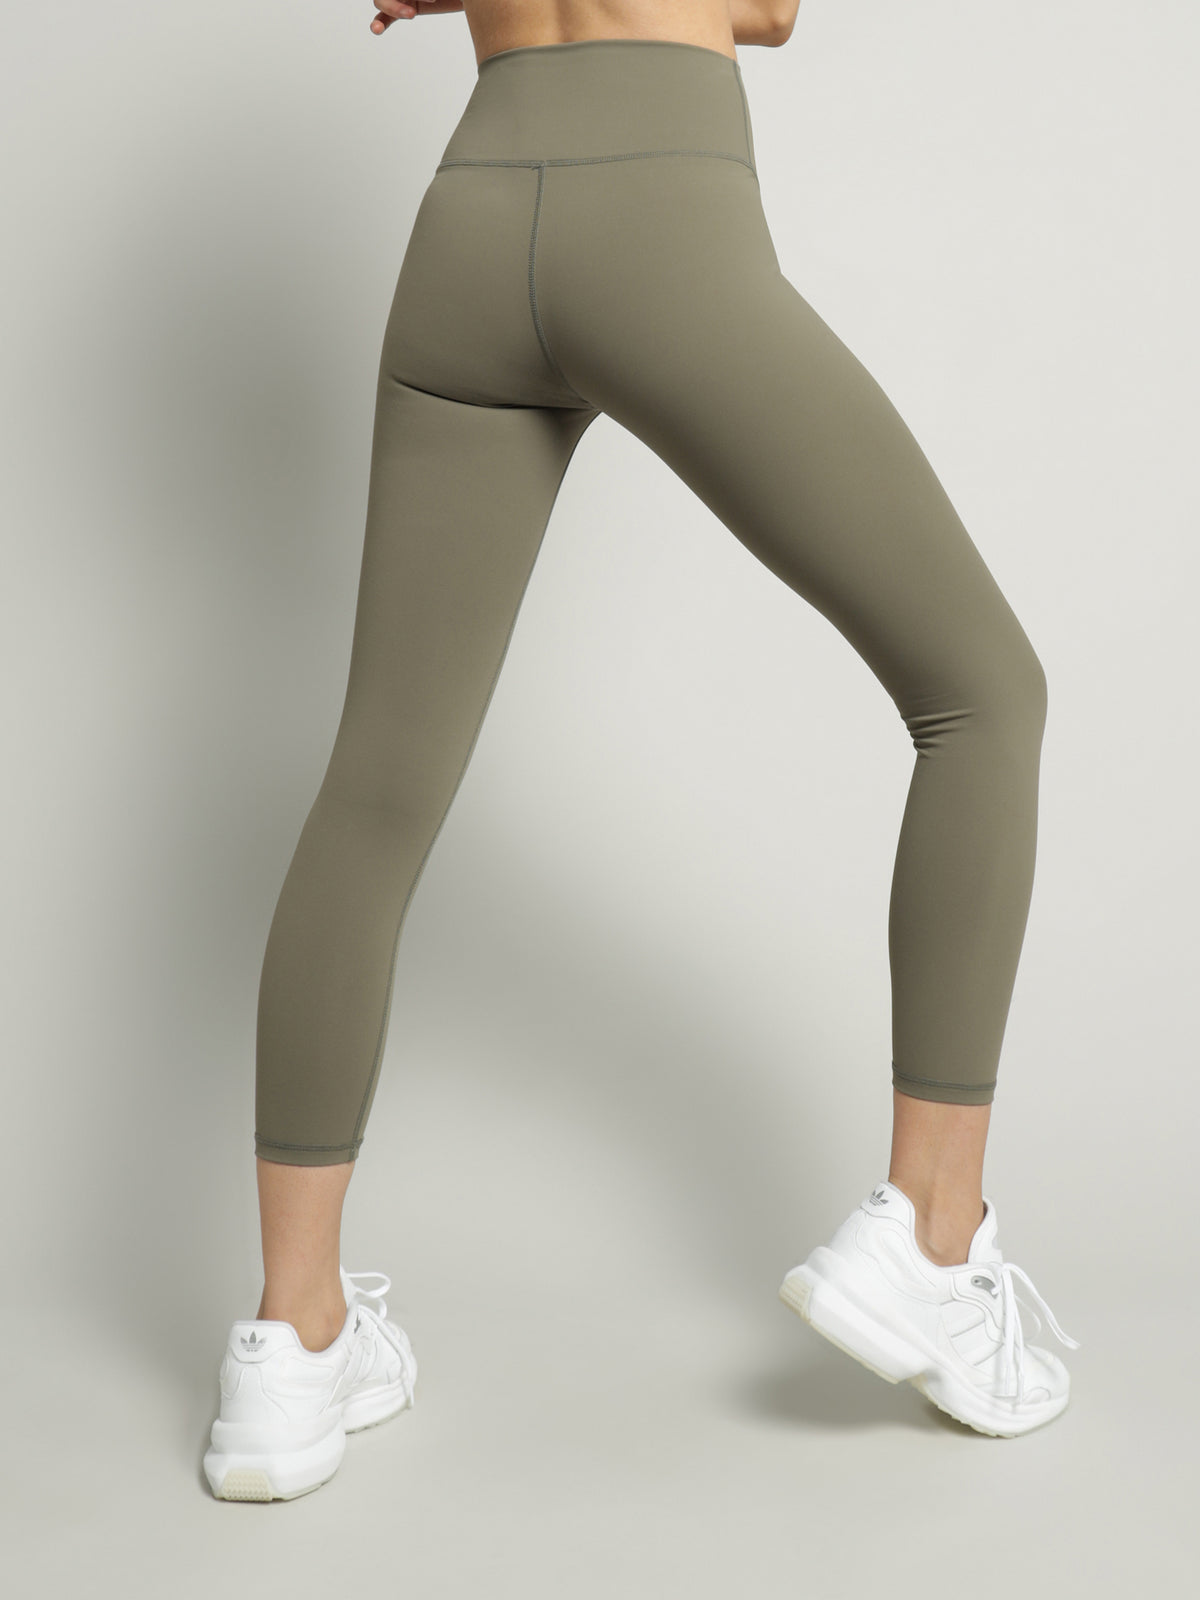 Nude Active High-Rise 7/8 Leggings in Olive Green